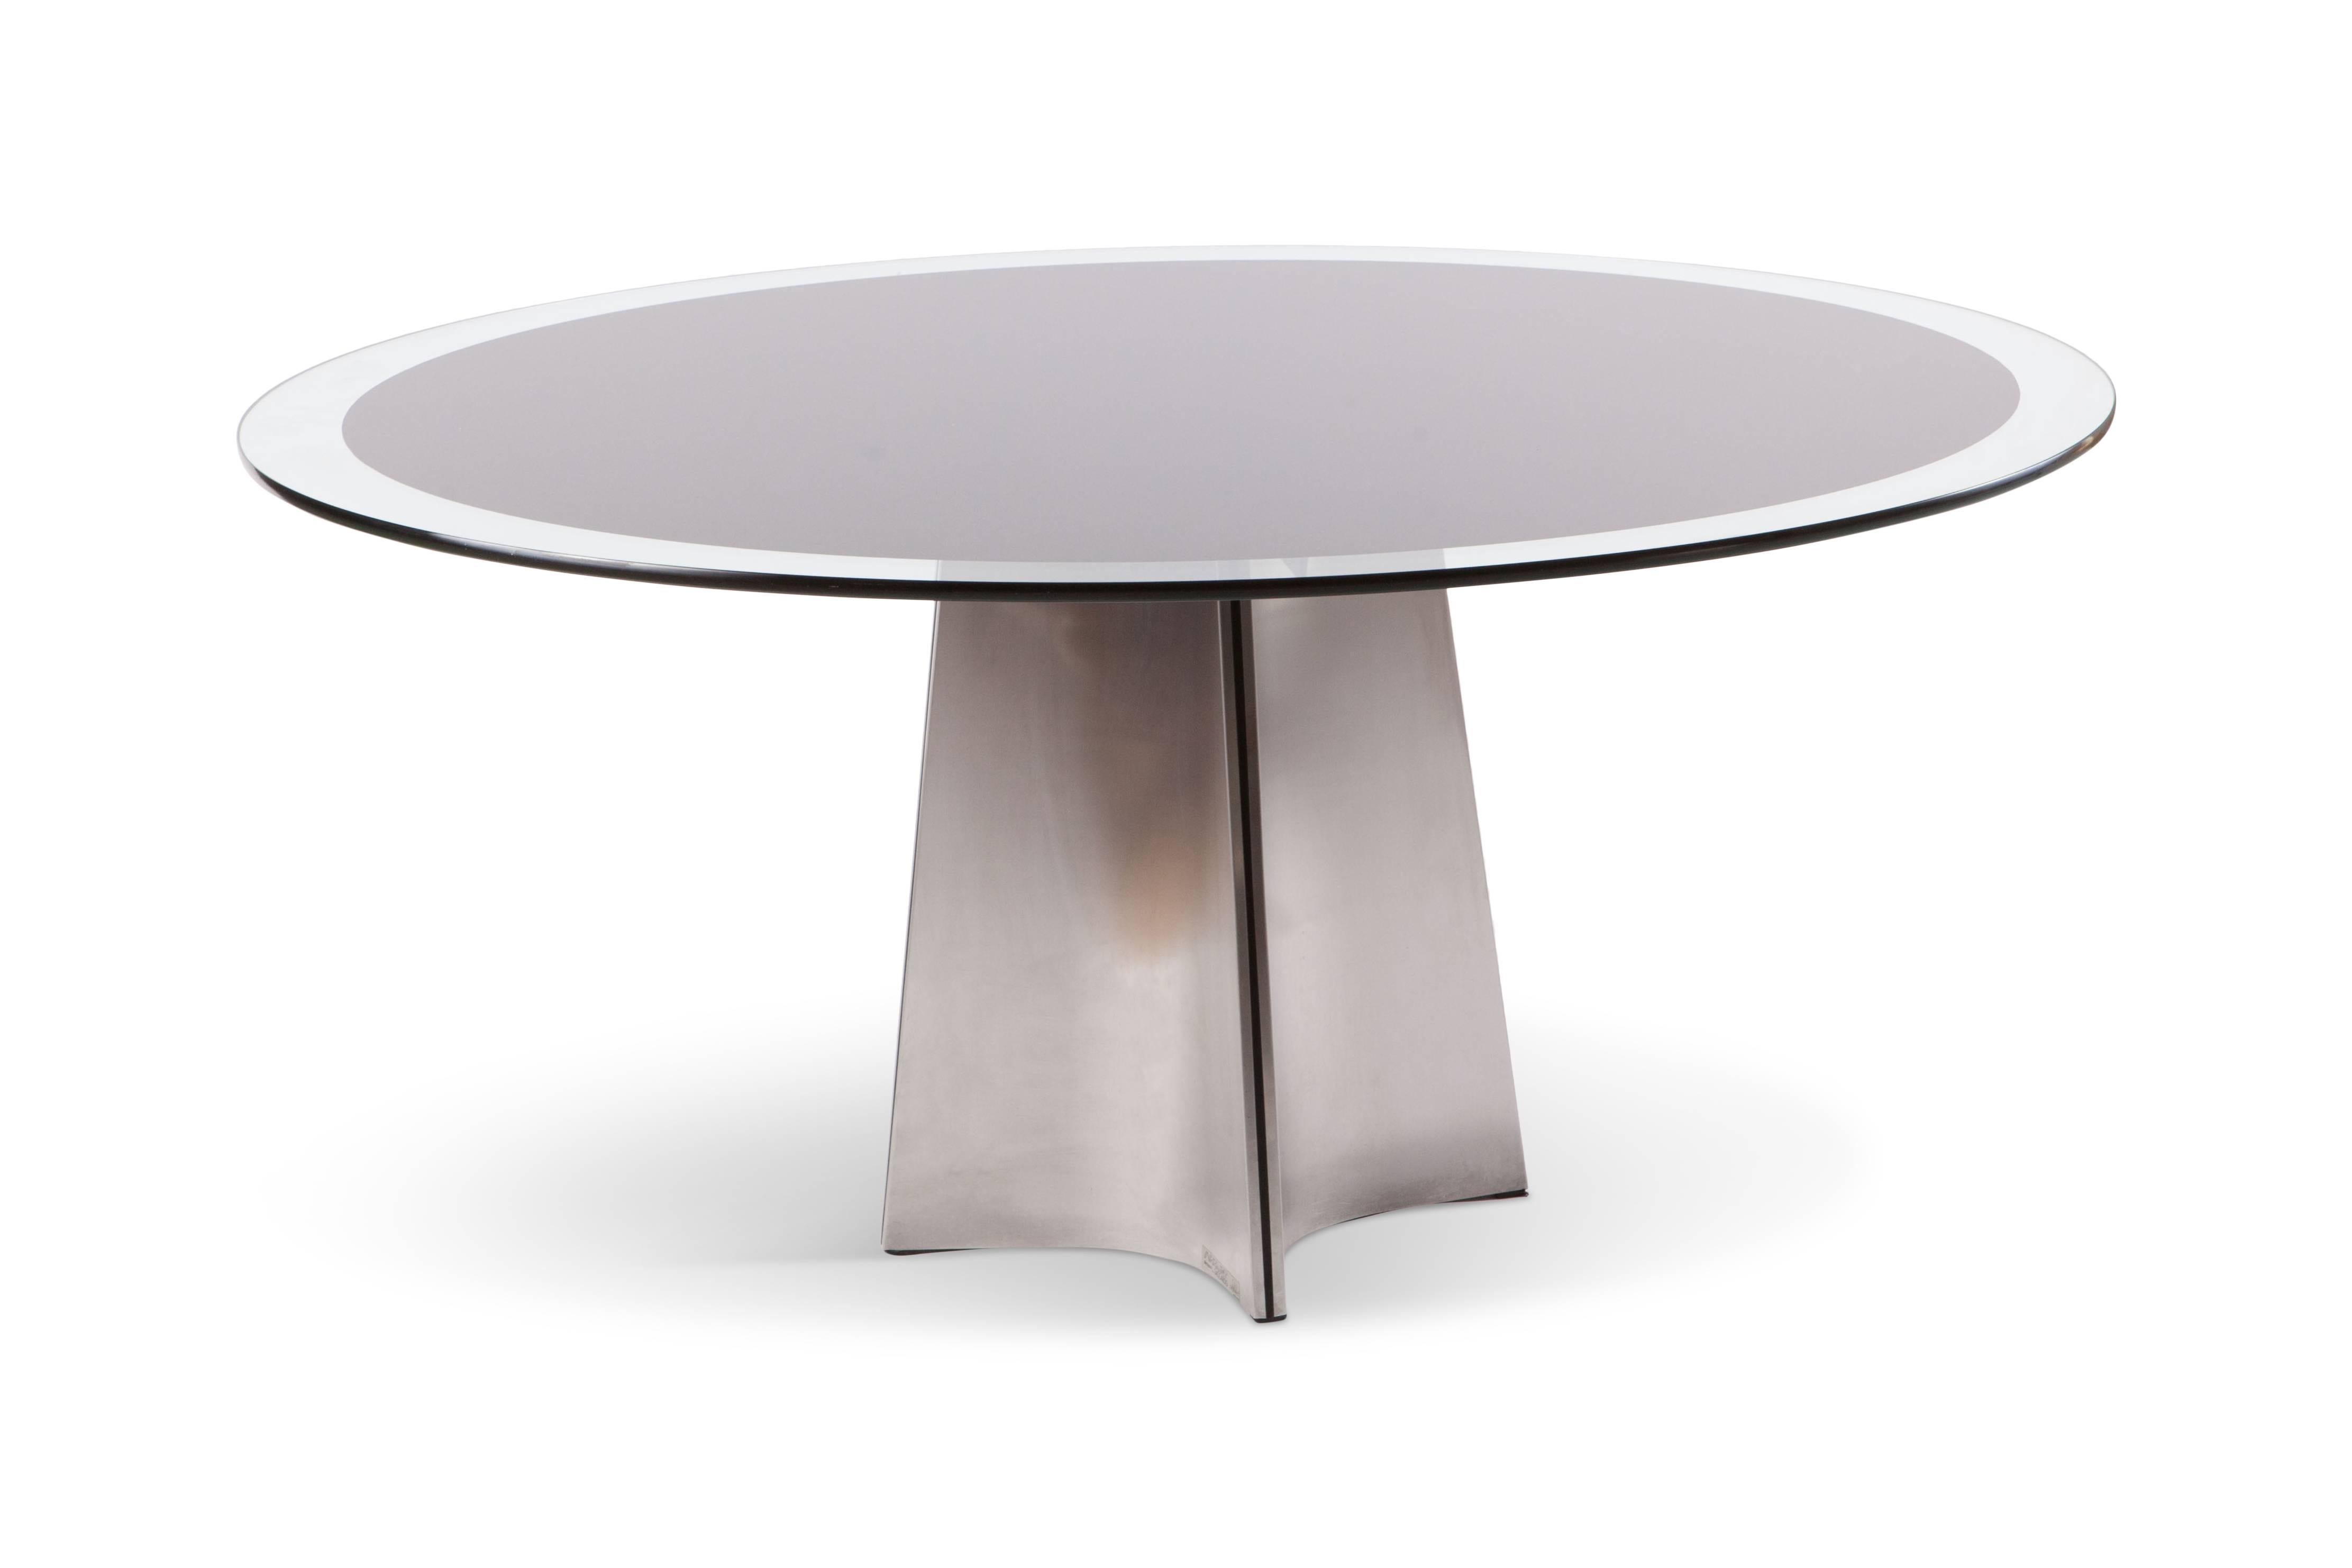 Round dining / centre table by Luigi Saccardo for Maison Jansen - Arrnet, France/Italy, 1970s

The top is made from clear glass with black colored centre. The star shaped base is made
from brushed aluminum and is made out of four separate concave